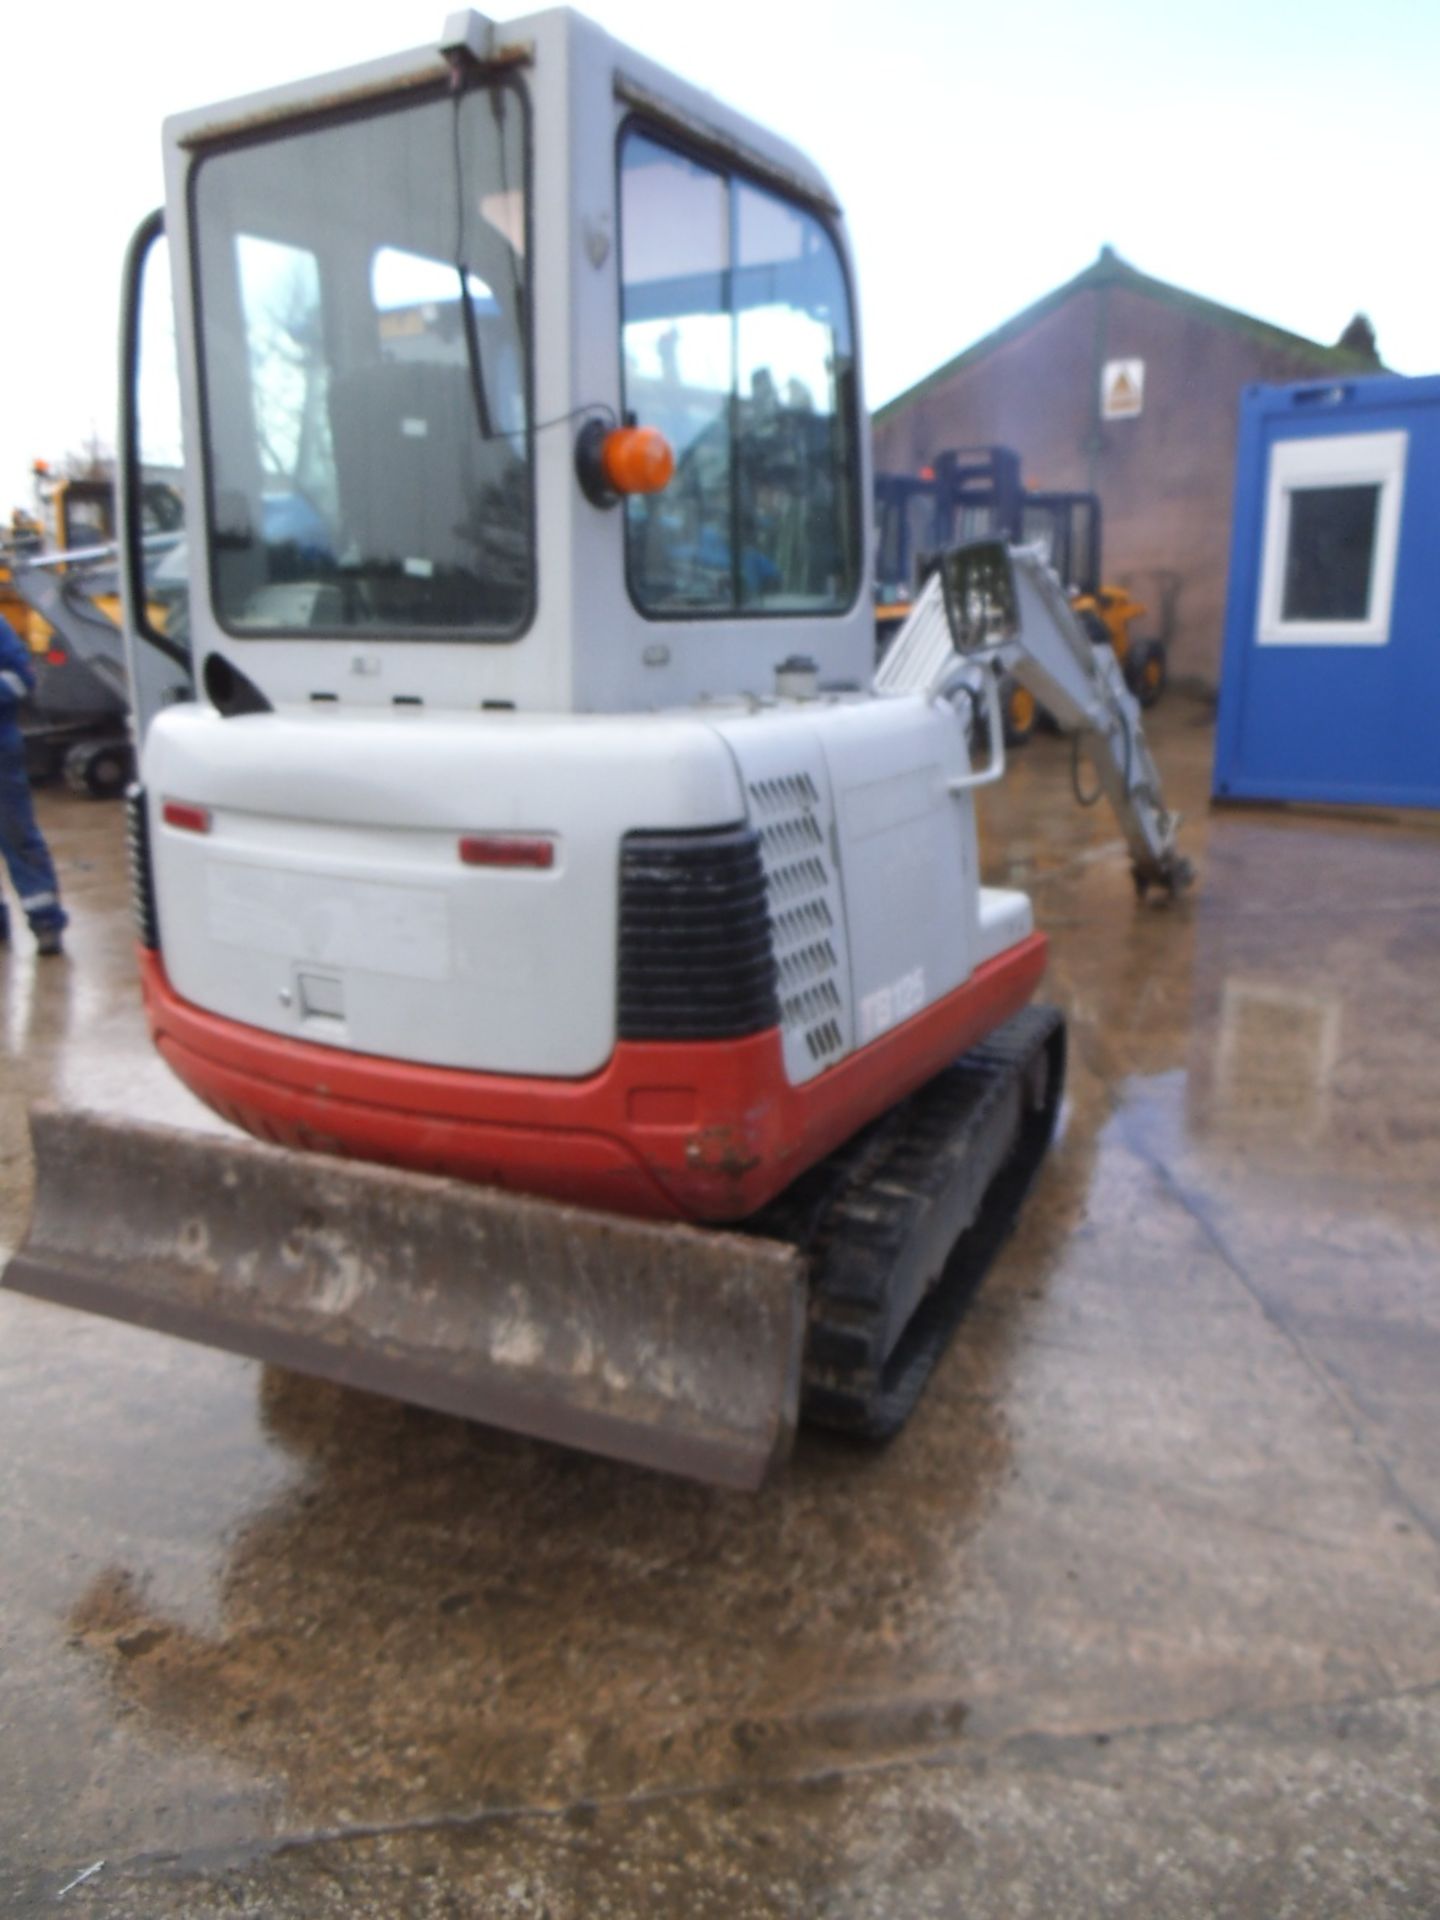 Takeuchi TB125 Tracked Excavator, Capacity: 3 Ton, Year of Manufacture: 2006, Hours: 2889  c/w 12in - Image 5 of 8